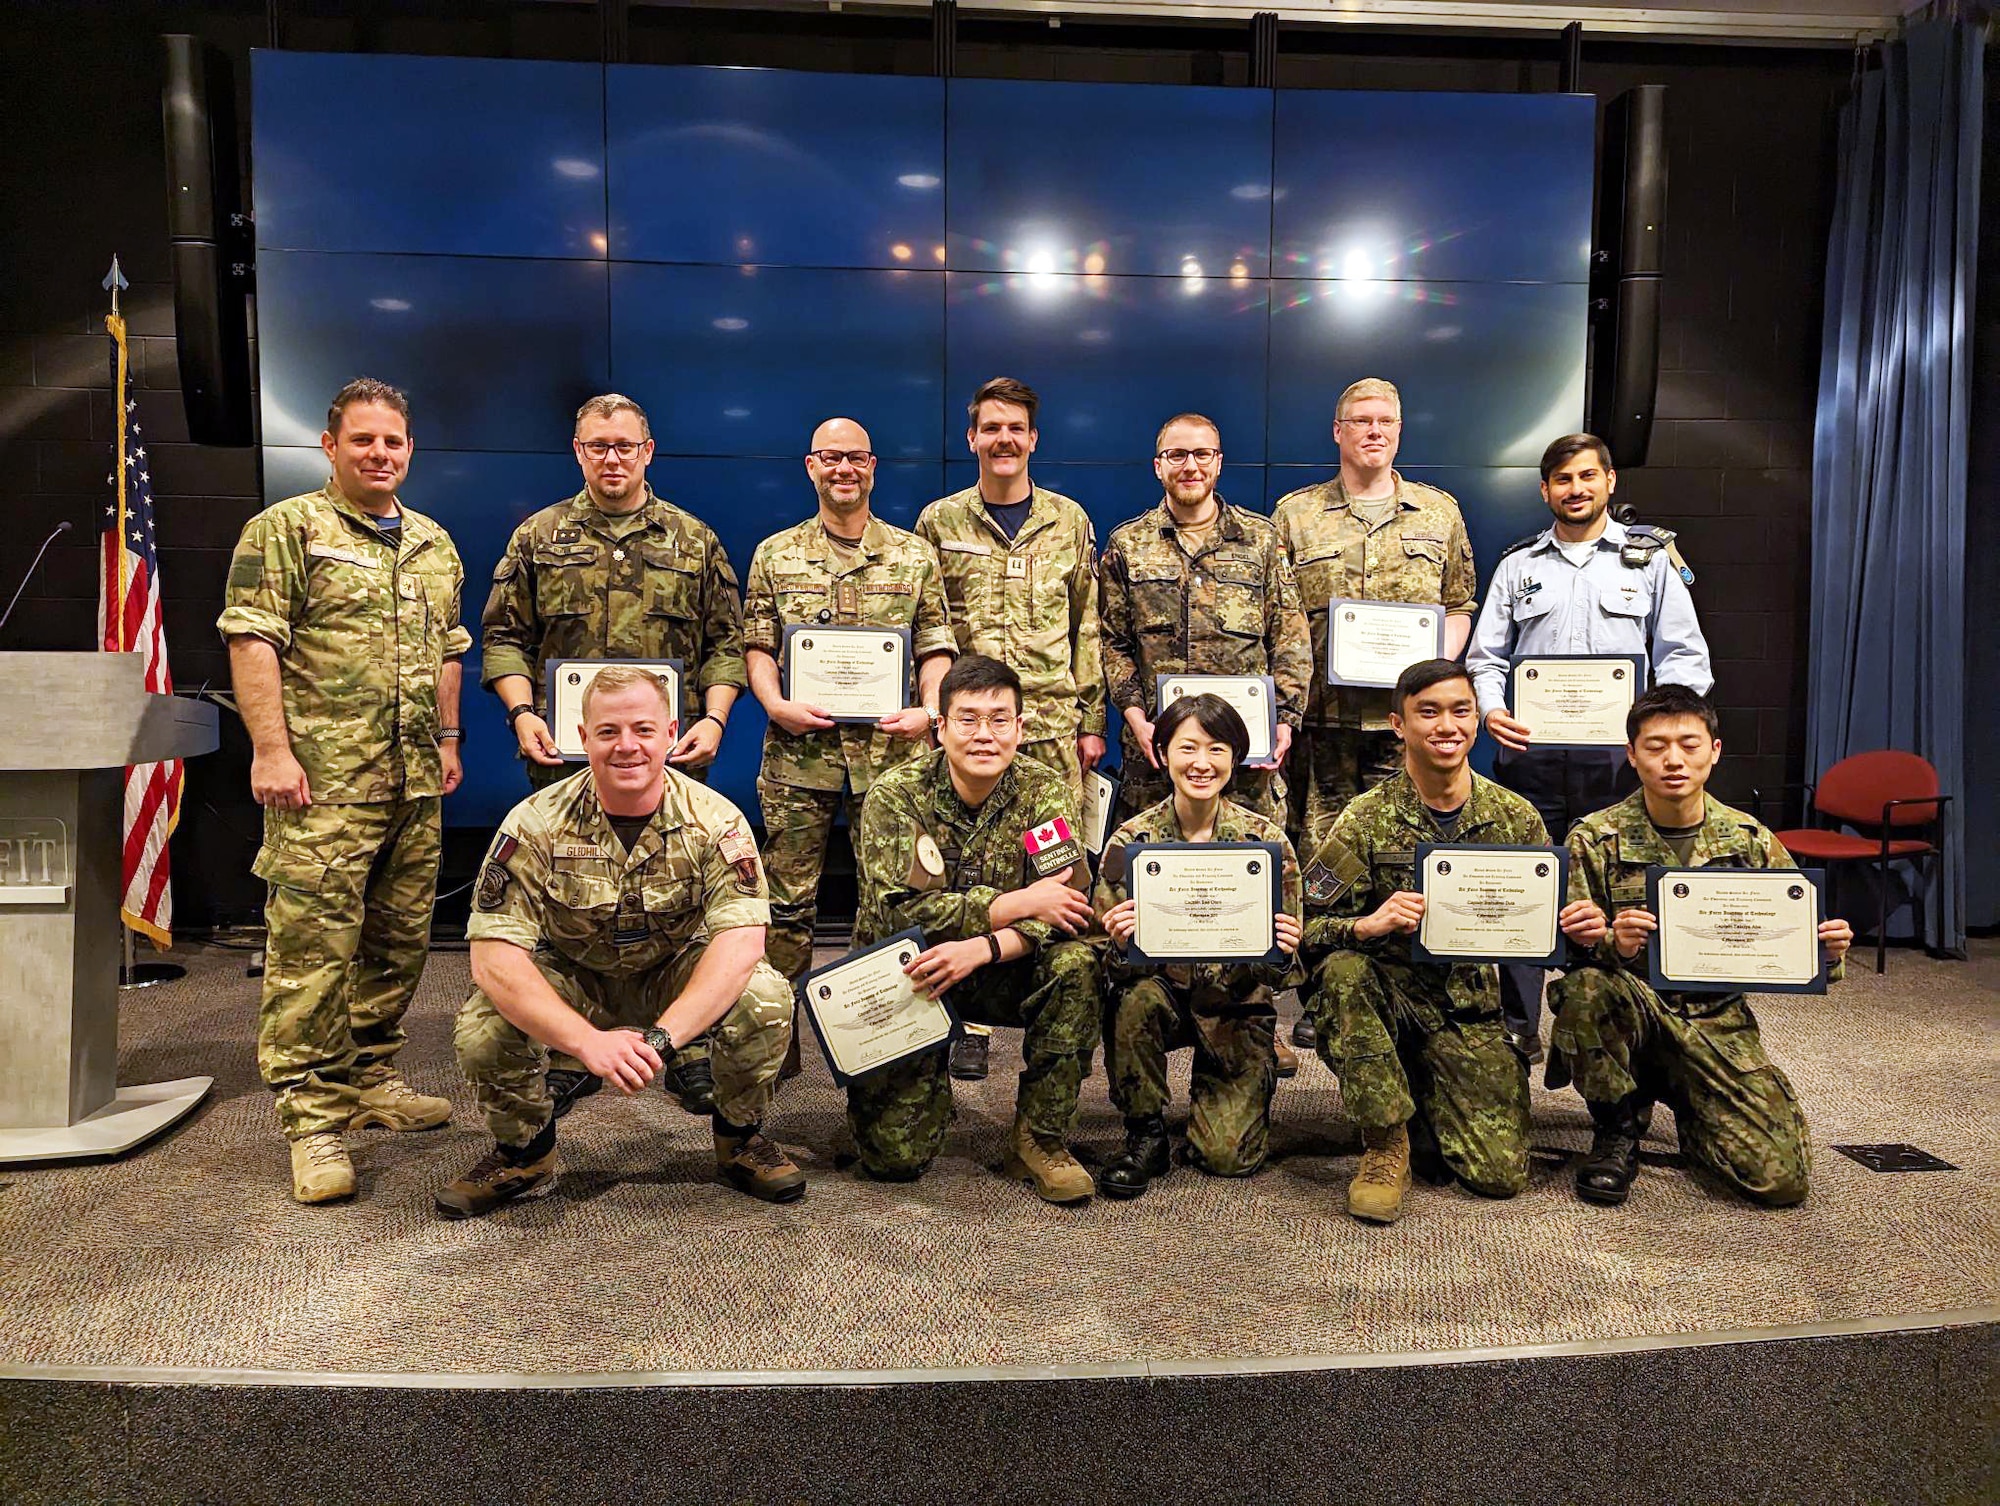 The Air Force Institute of Technology's School of Strategic Force Studies International Cyberspace Education course recently completed the first in-resident offering since 2019 with 12 students from eight countries